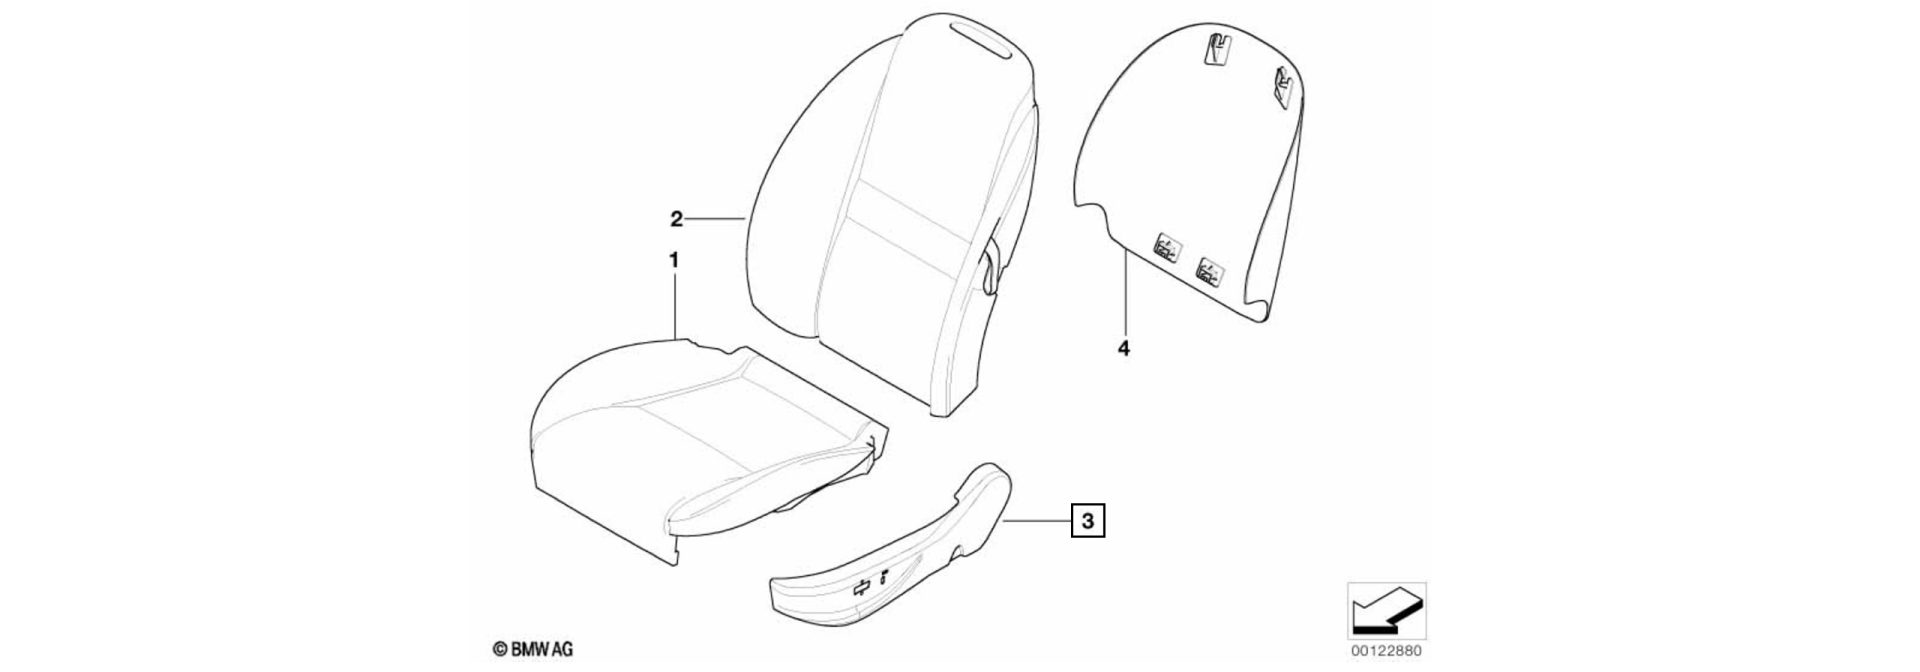 Seat trim exploded-view drawing